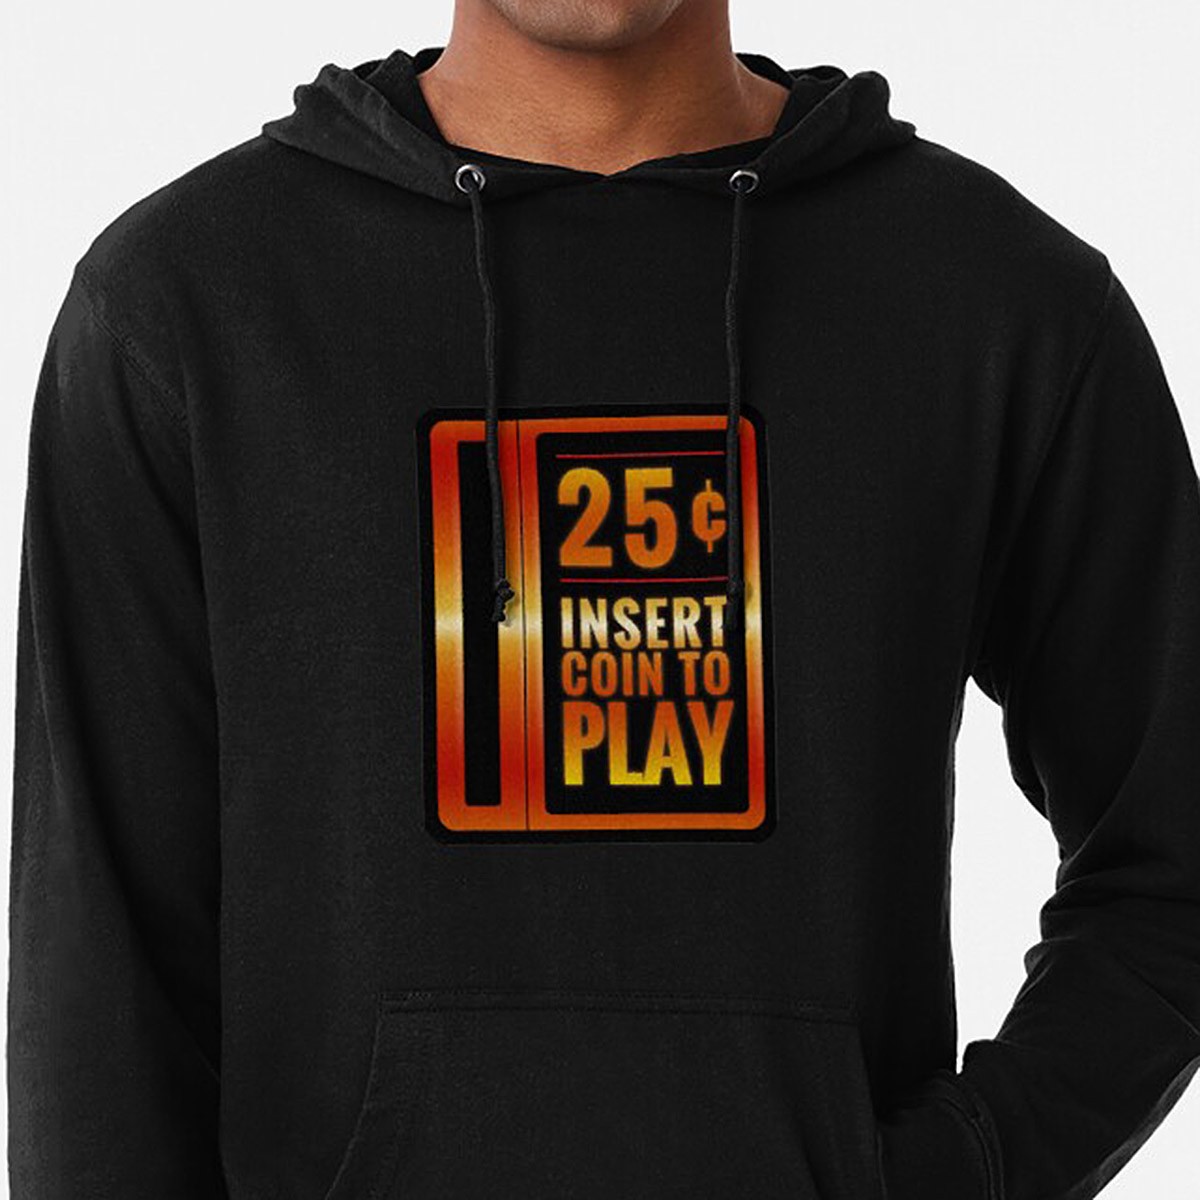 Insert 25¢ to play classic arcade coin slot - Lightweight Hoodie - 